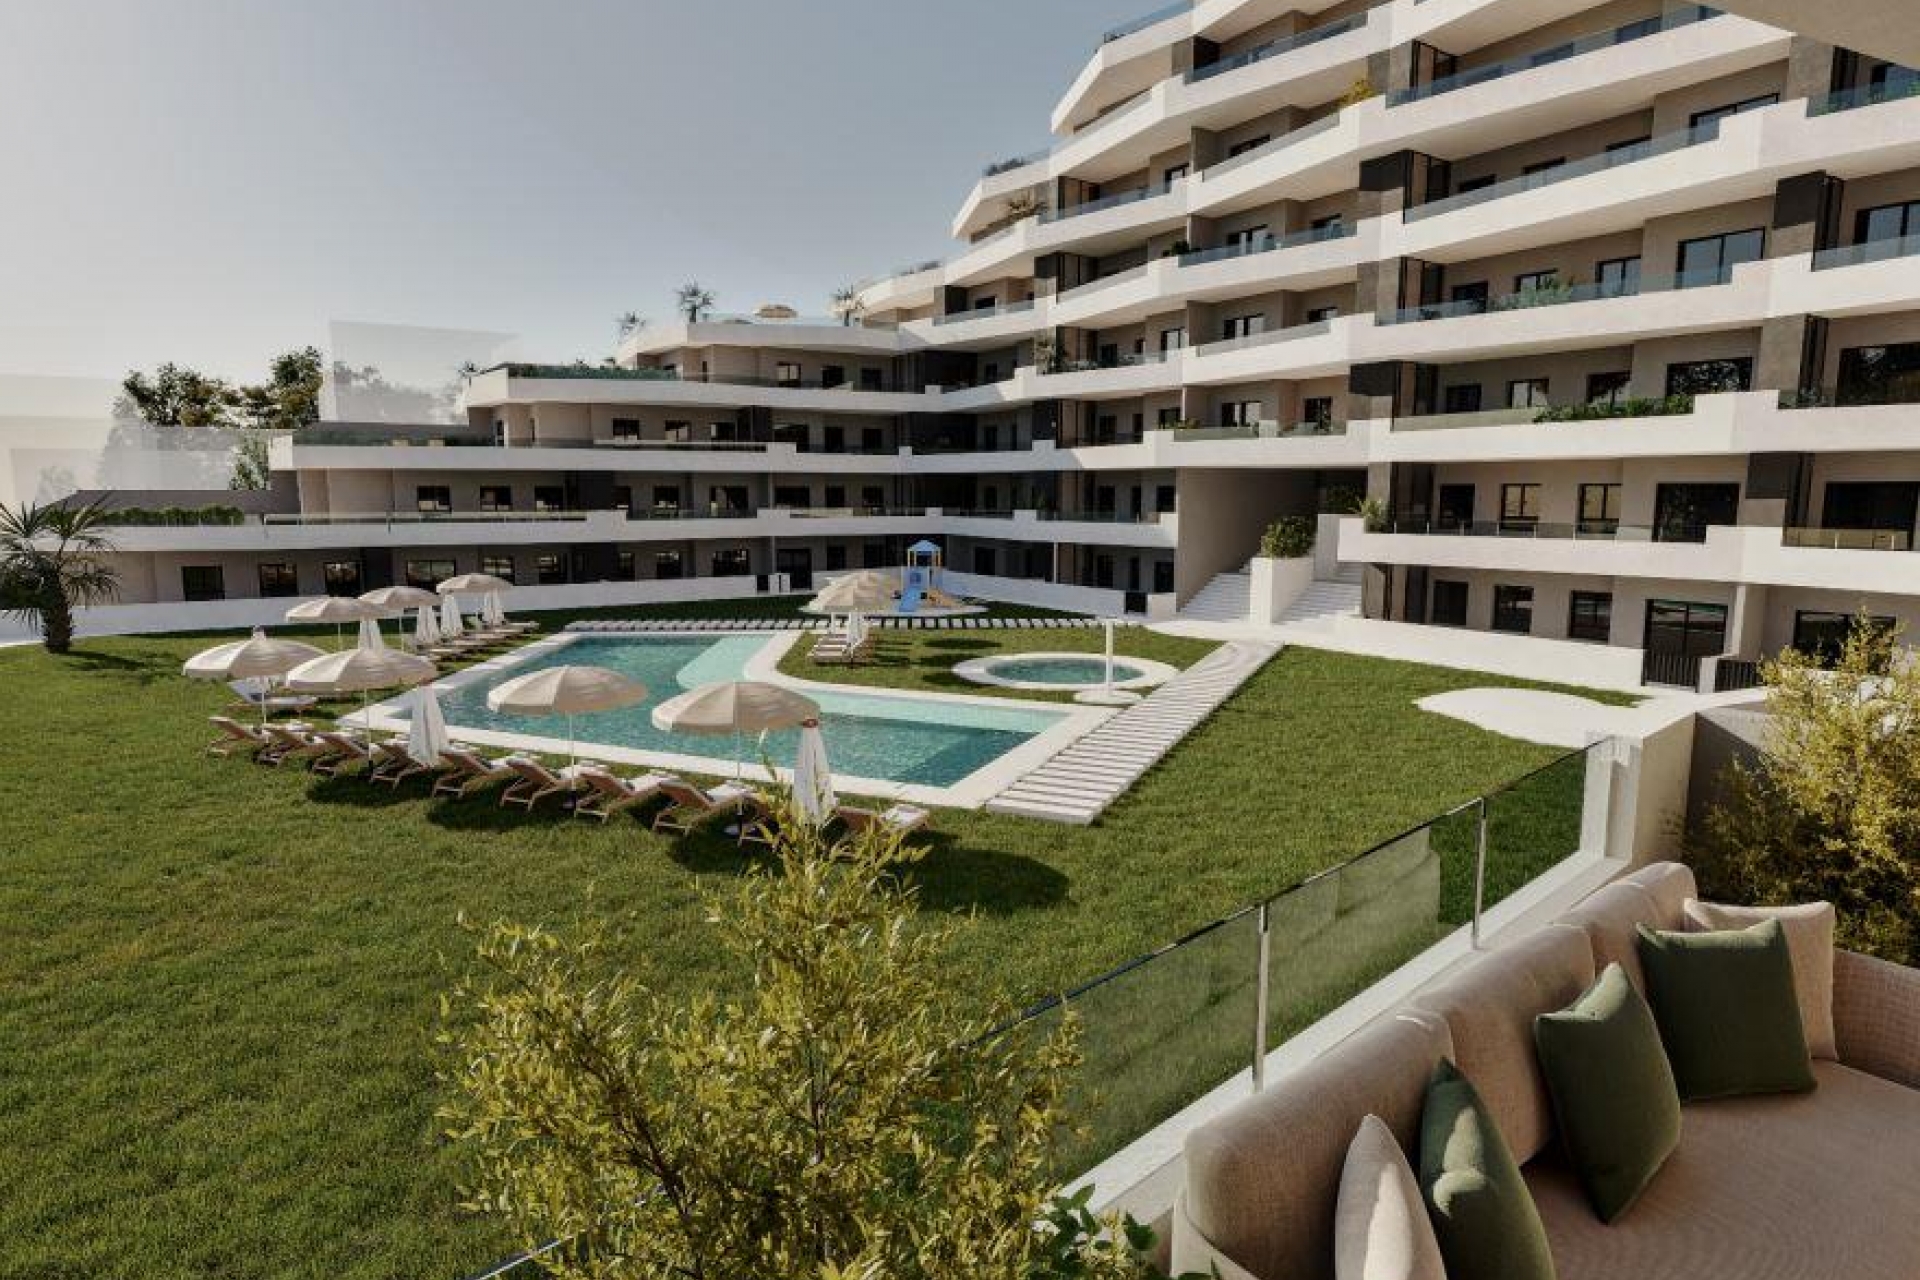 New Property for sale - Apartment for sale - San Miguel de Salinas - San Miguel de Salinas Town